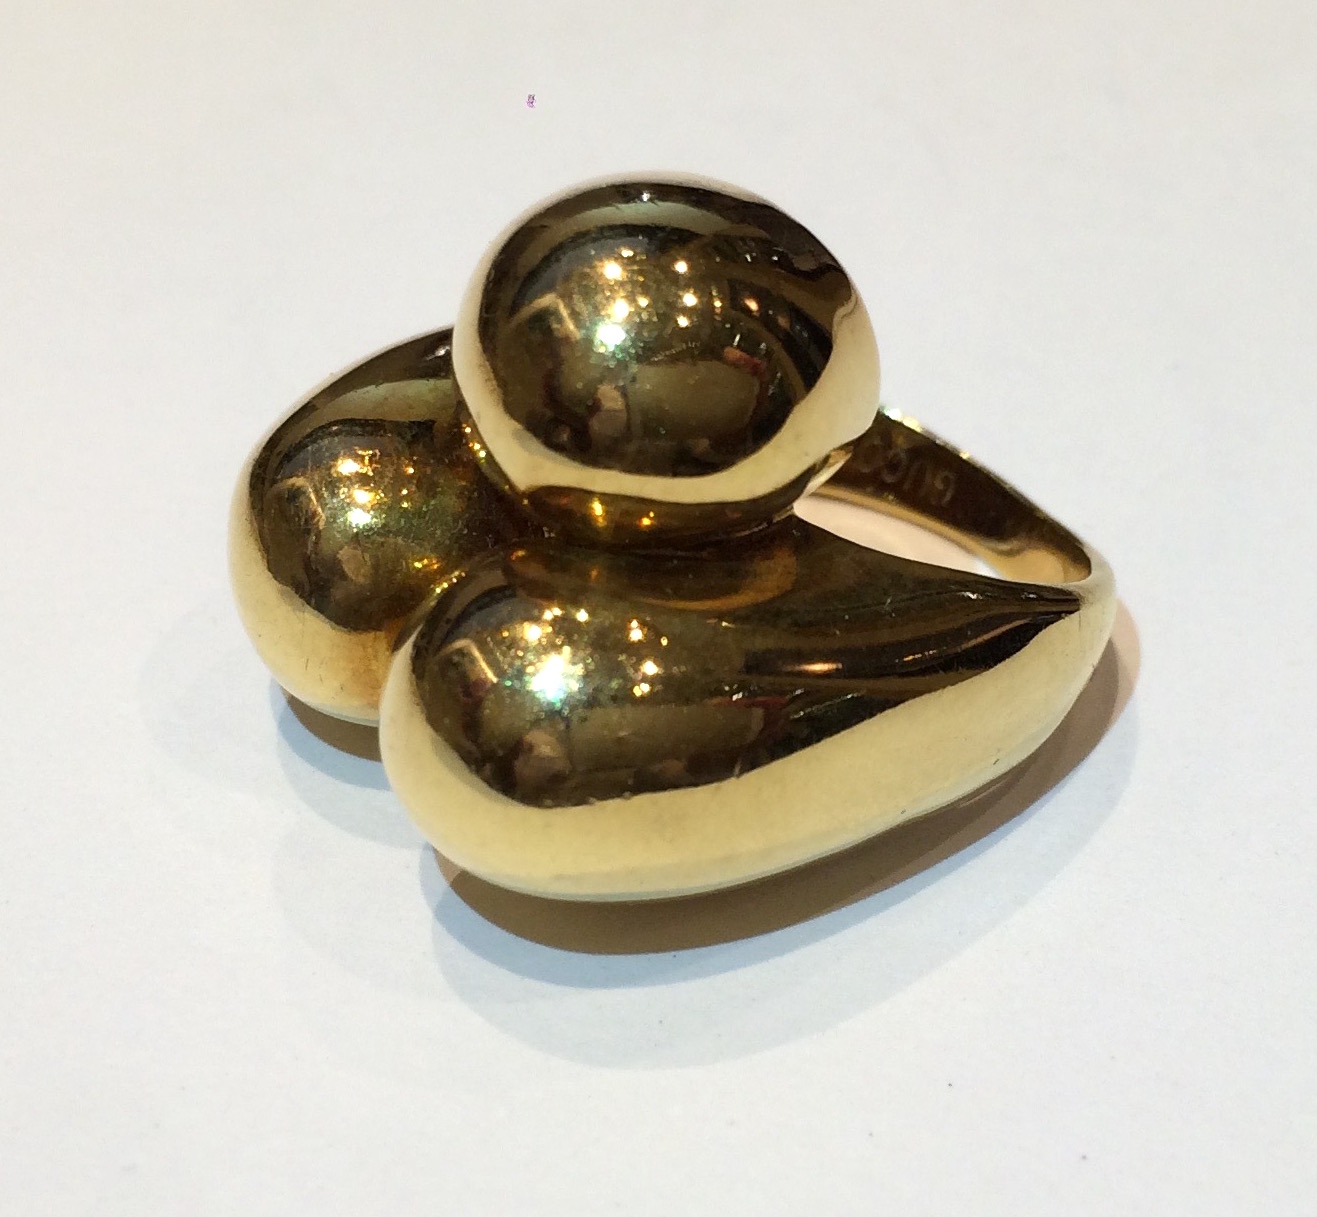 Gucci “Sculpture” ring, 18K yellow gold in a tripartite domed sculptural form, signed, c. 1970